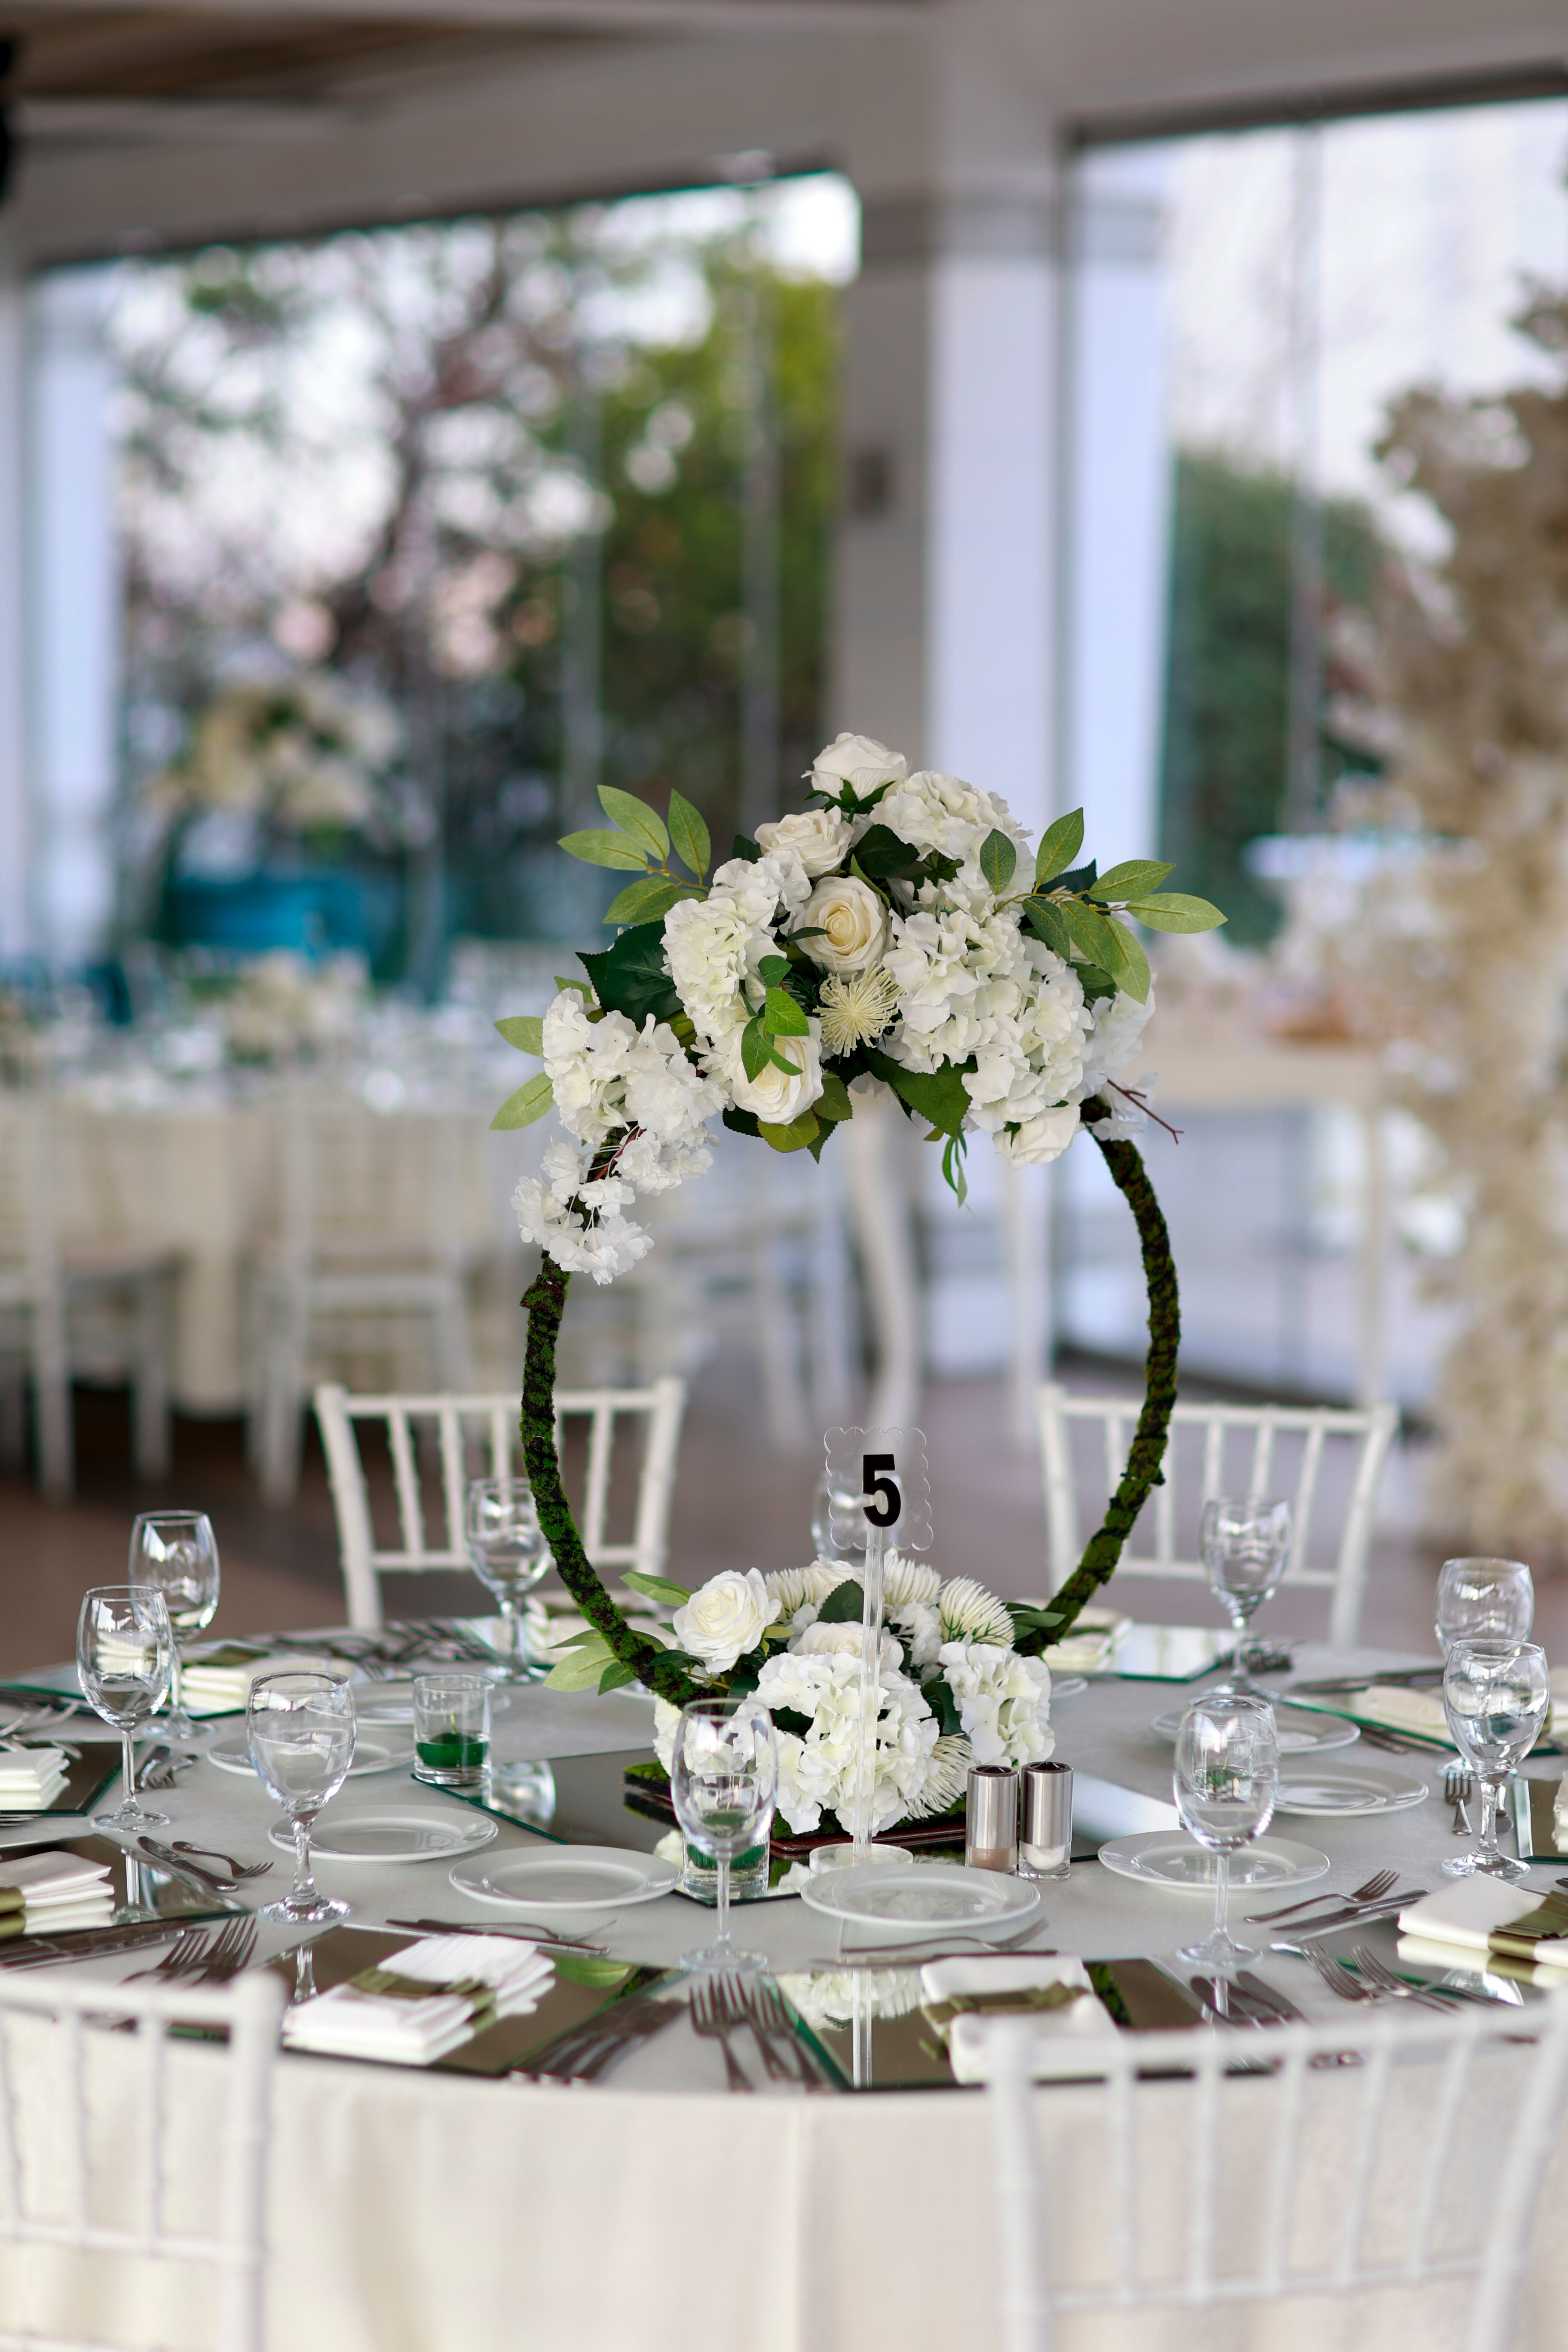 White color wedding table | Source: Shutterstock